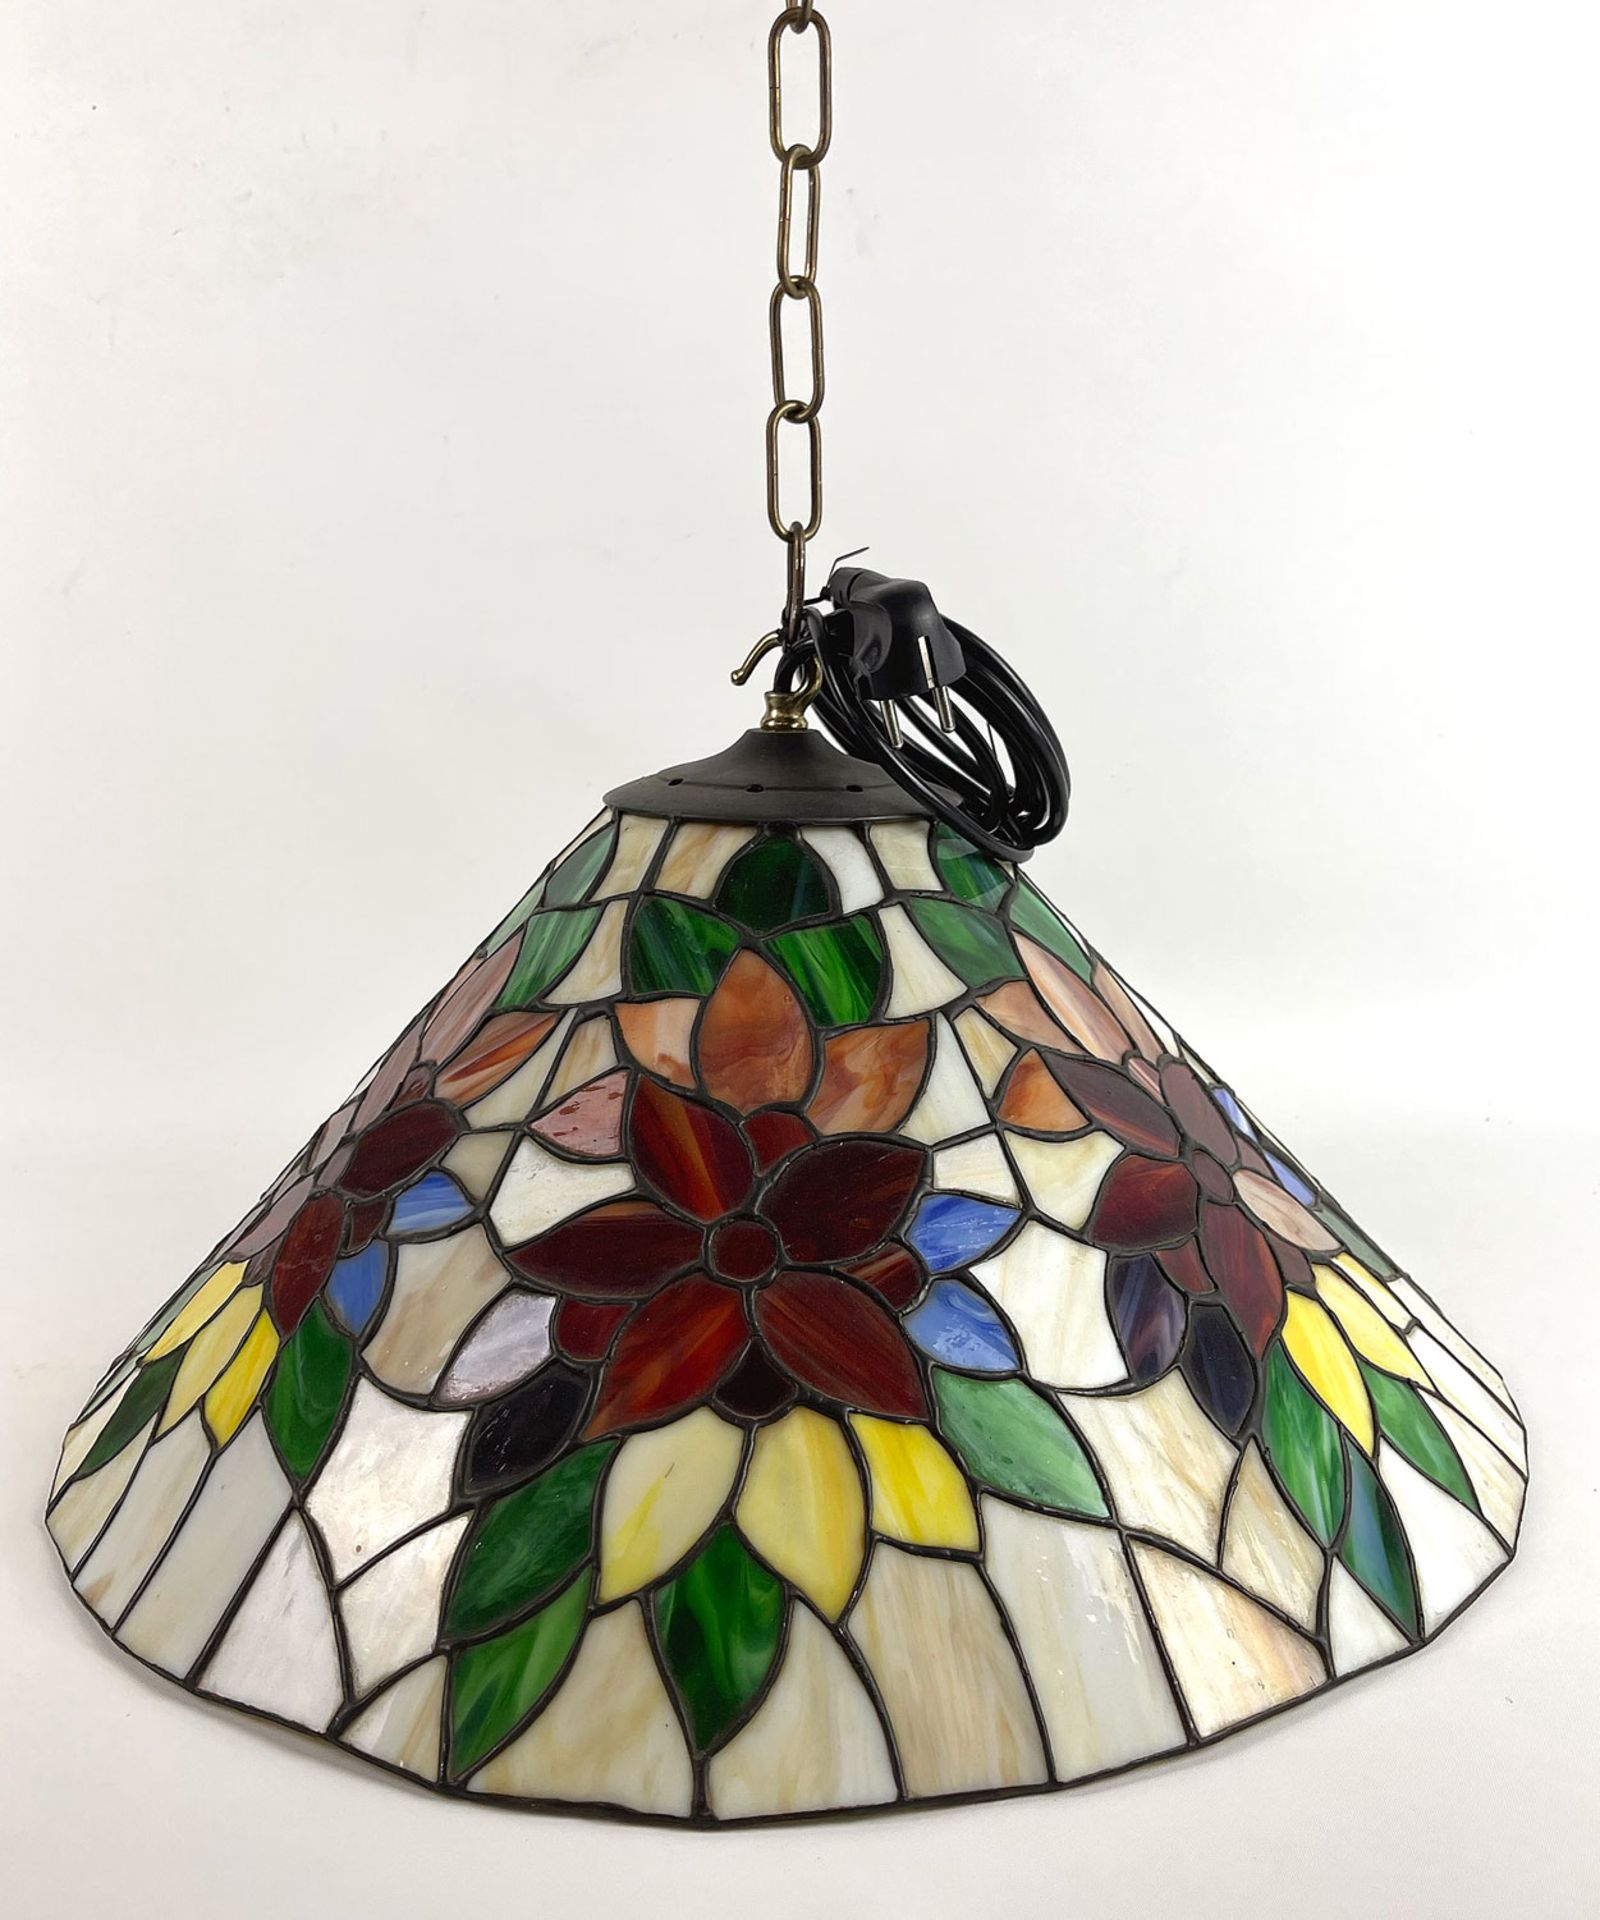 Tiffany Style Hanging Ceiling Lamp with Flower Motif - Bild 2 aus 4